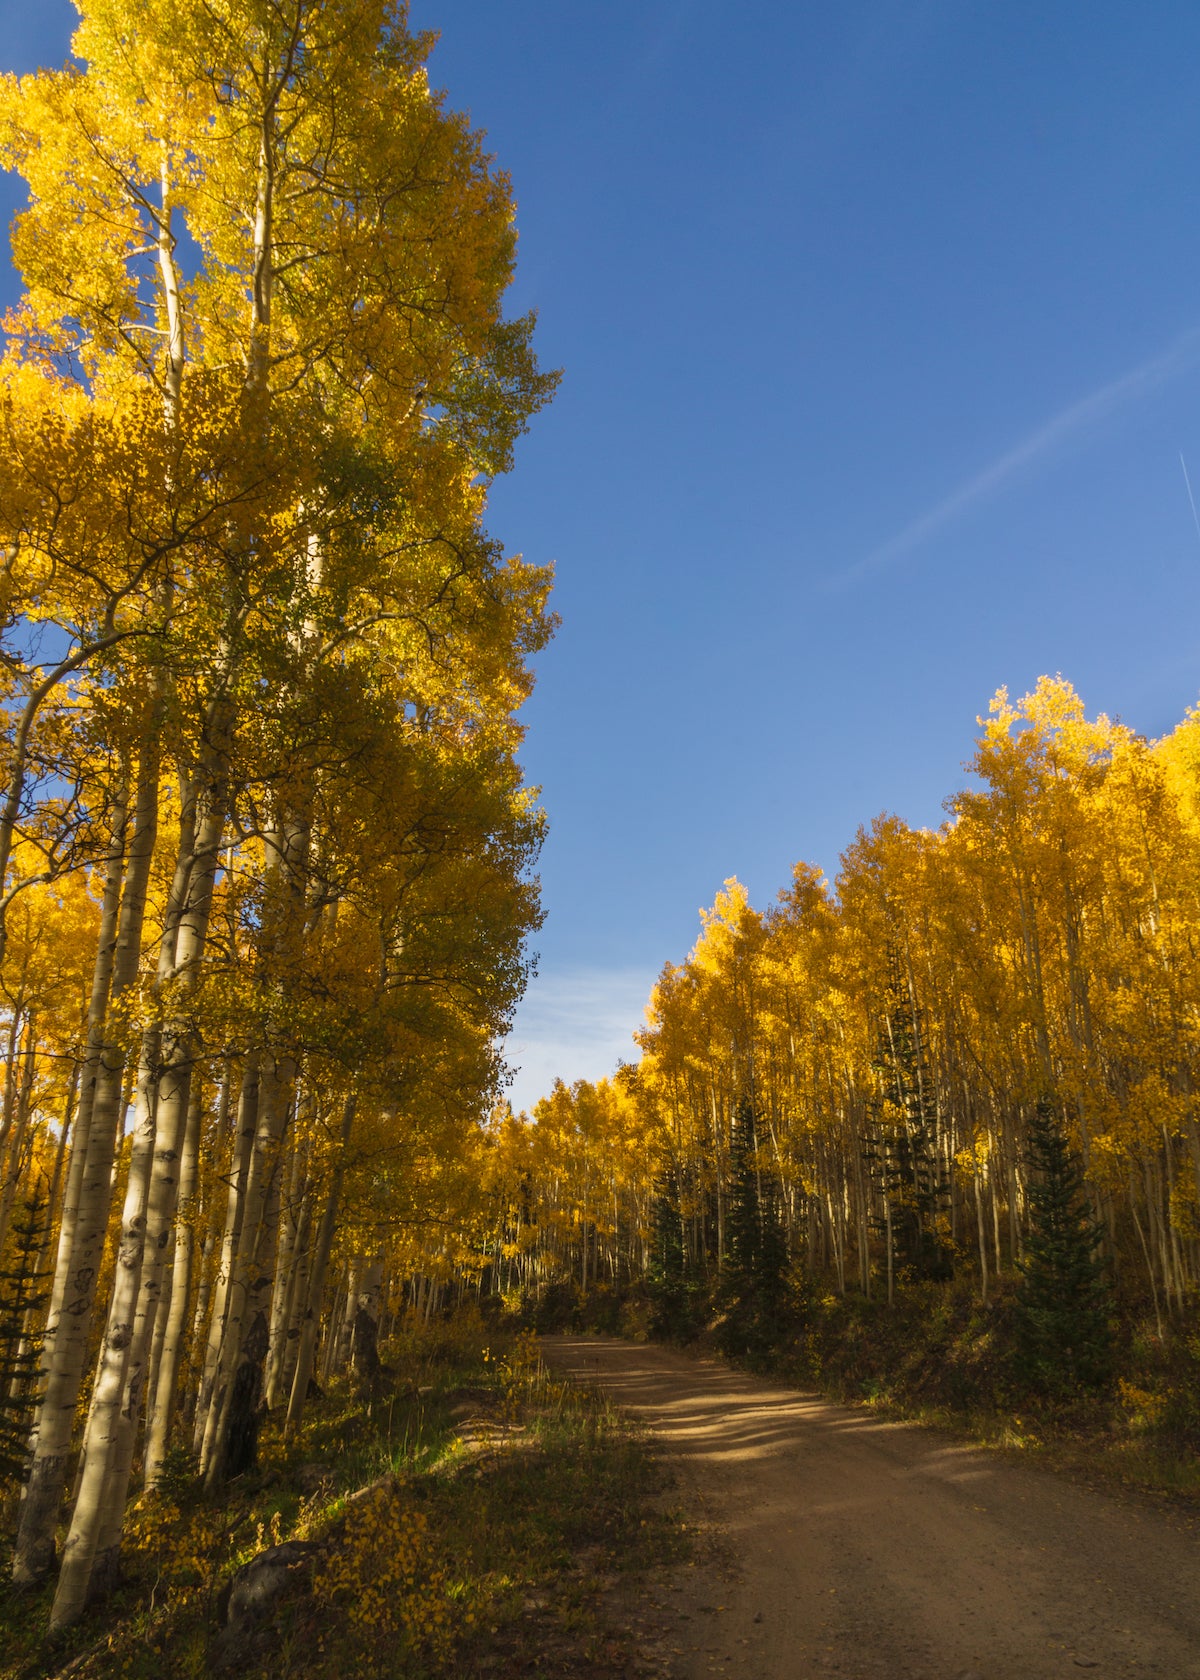 Photo of golden aspen trees lined alongside a road taken in the early afternoon by Justine Quinones